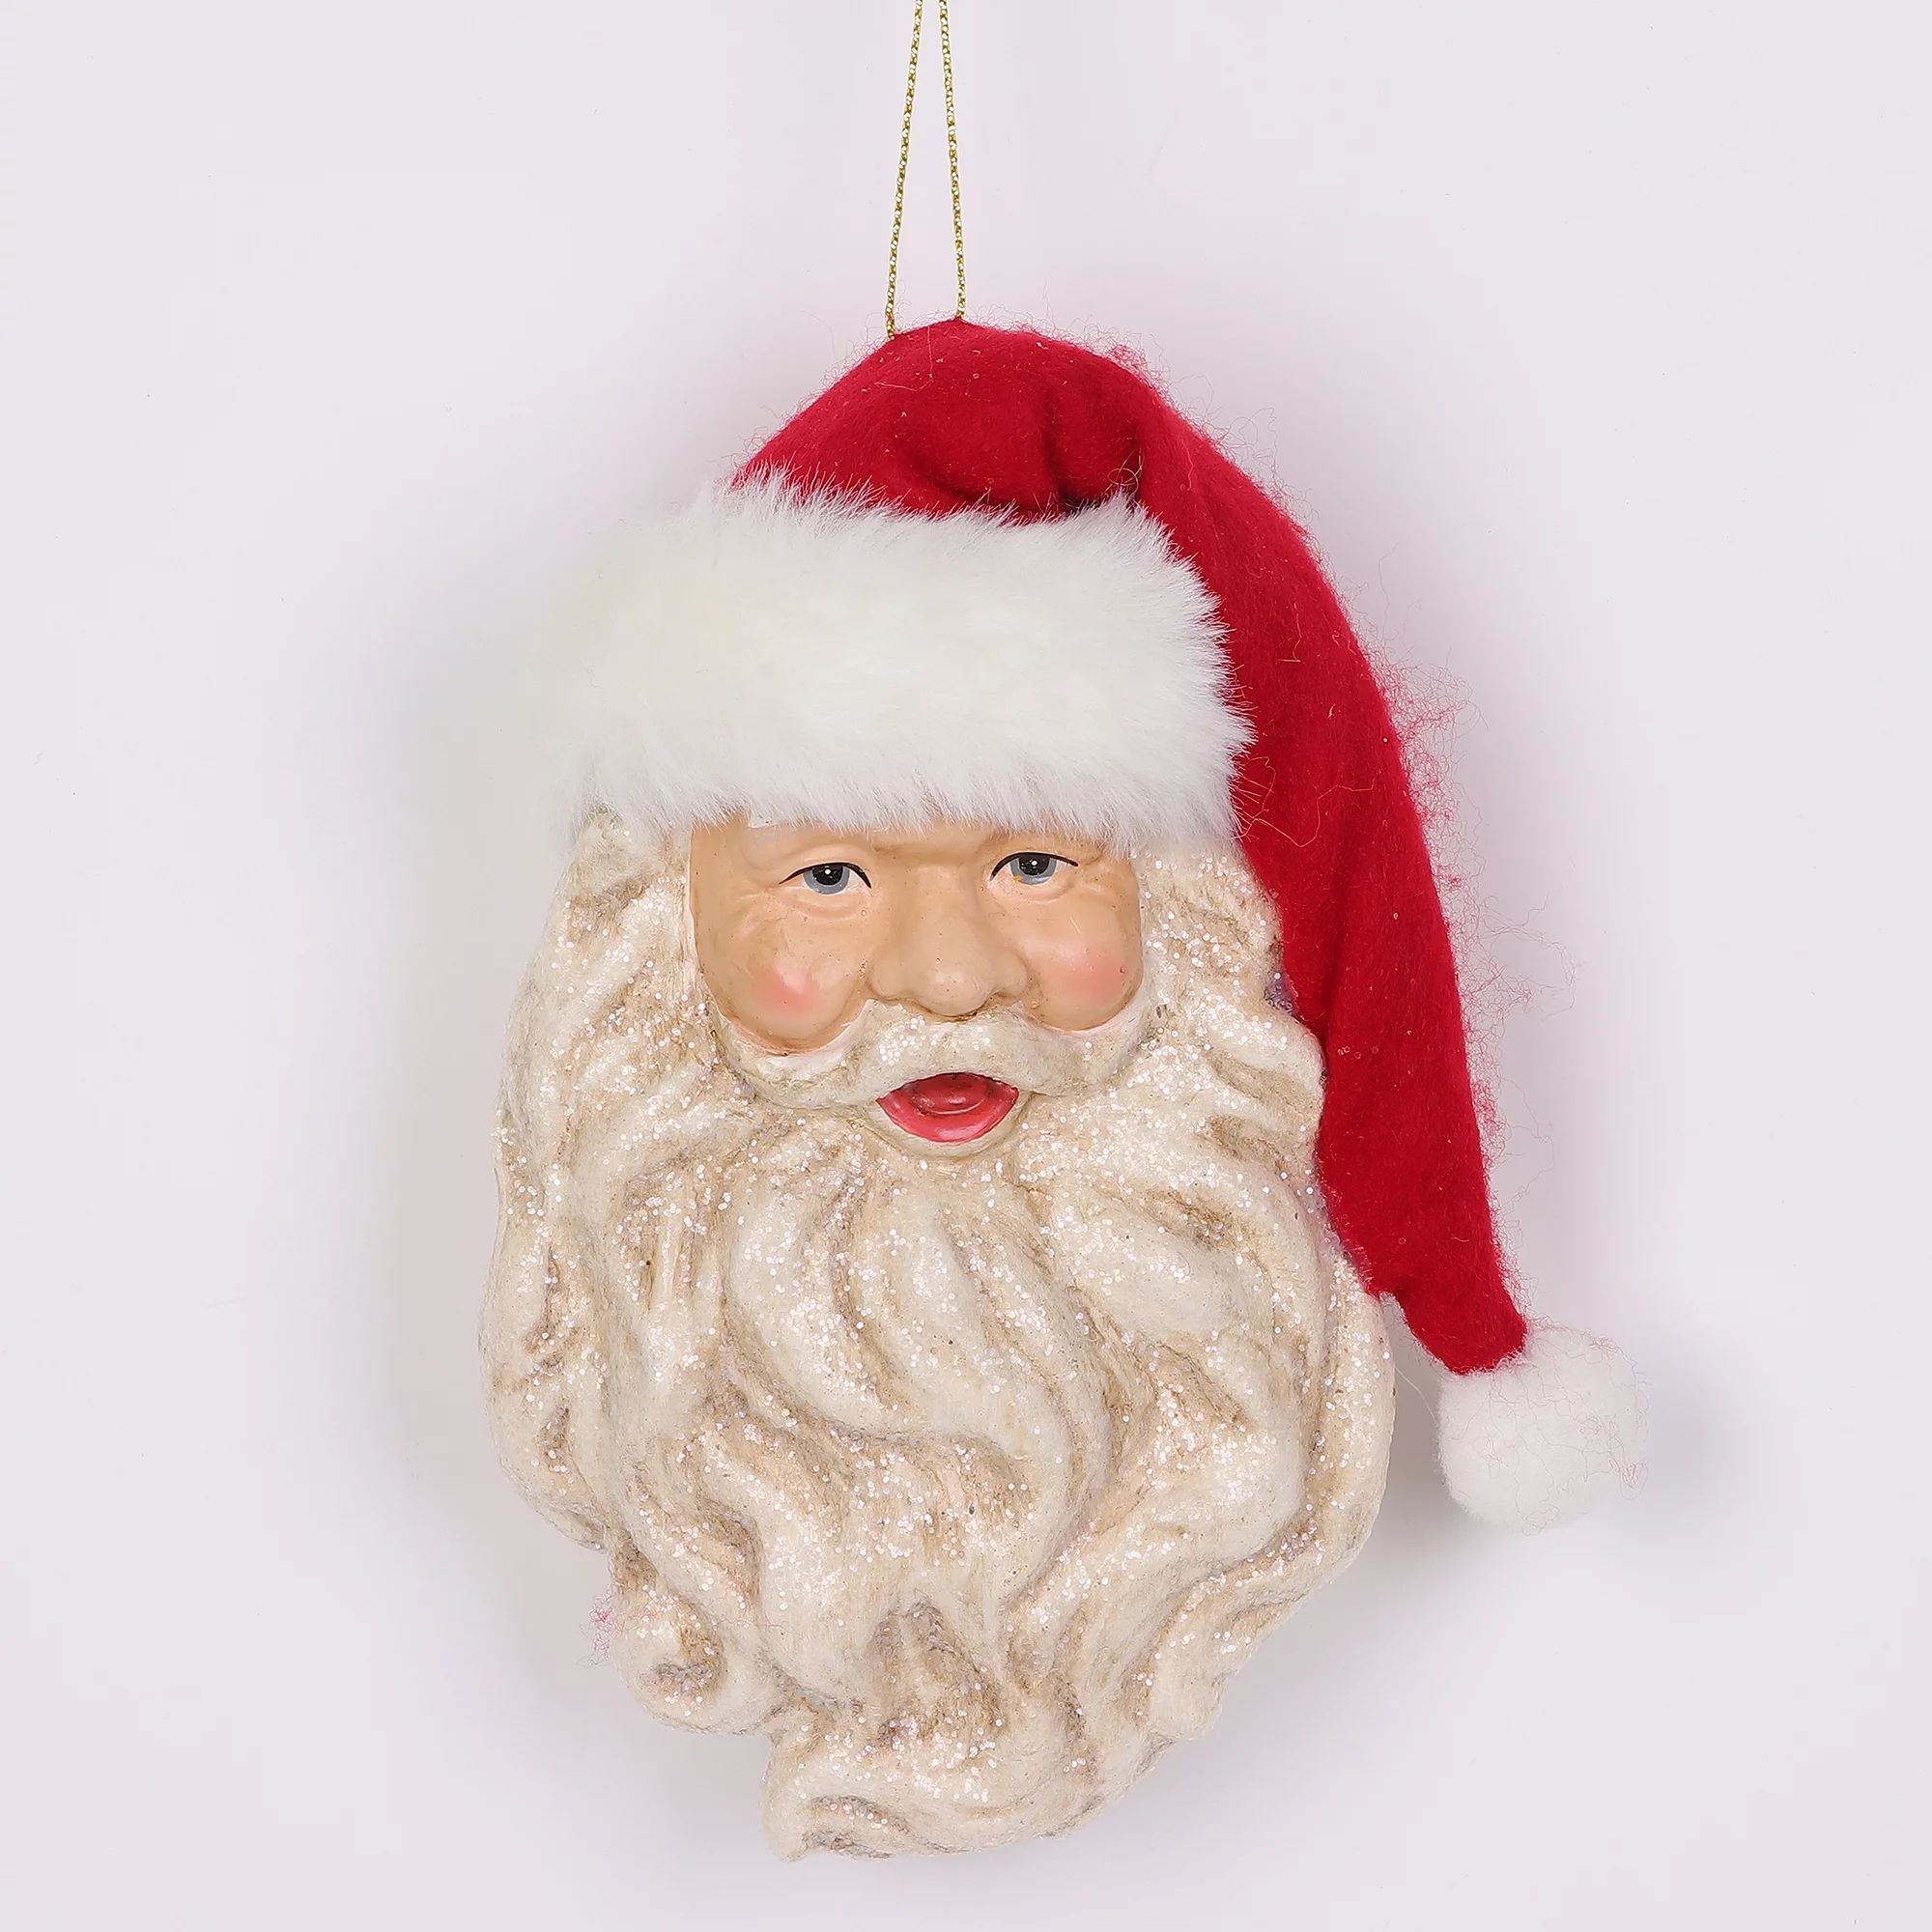 Glitter Santa Head Christmas Ornament, 6 in, Multi-Color, by Holiday Time | Walmart (US)